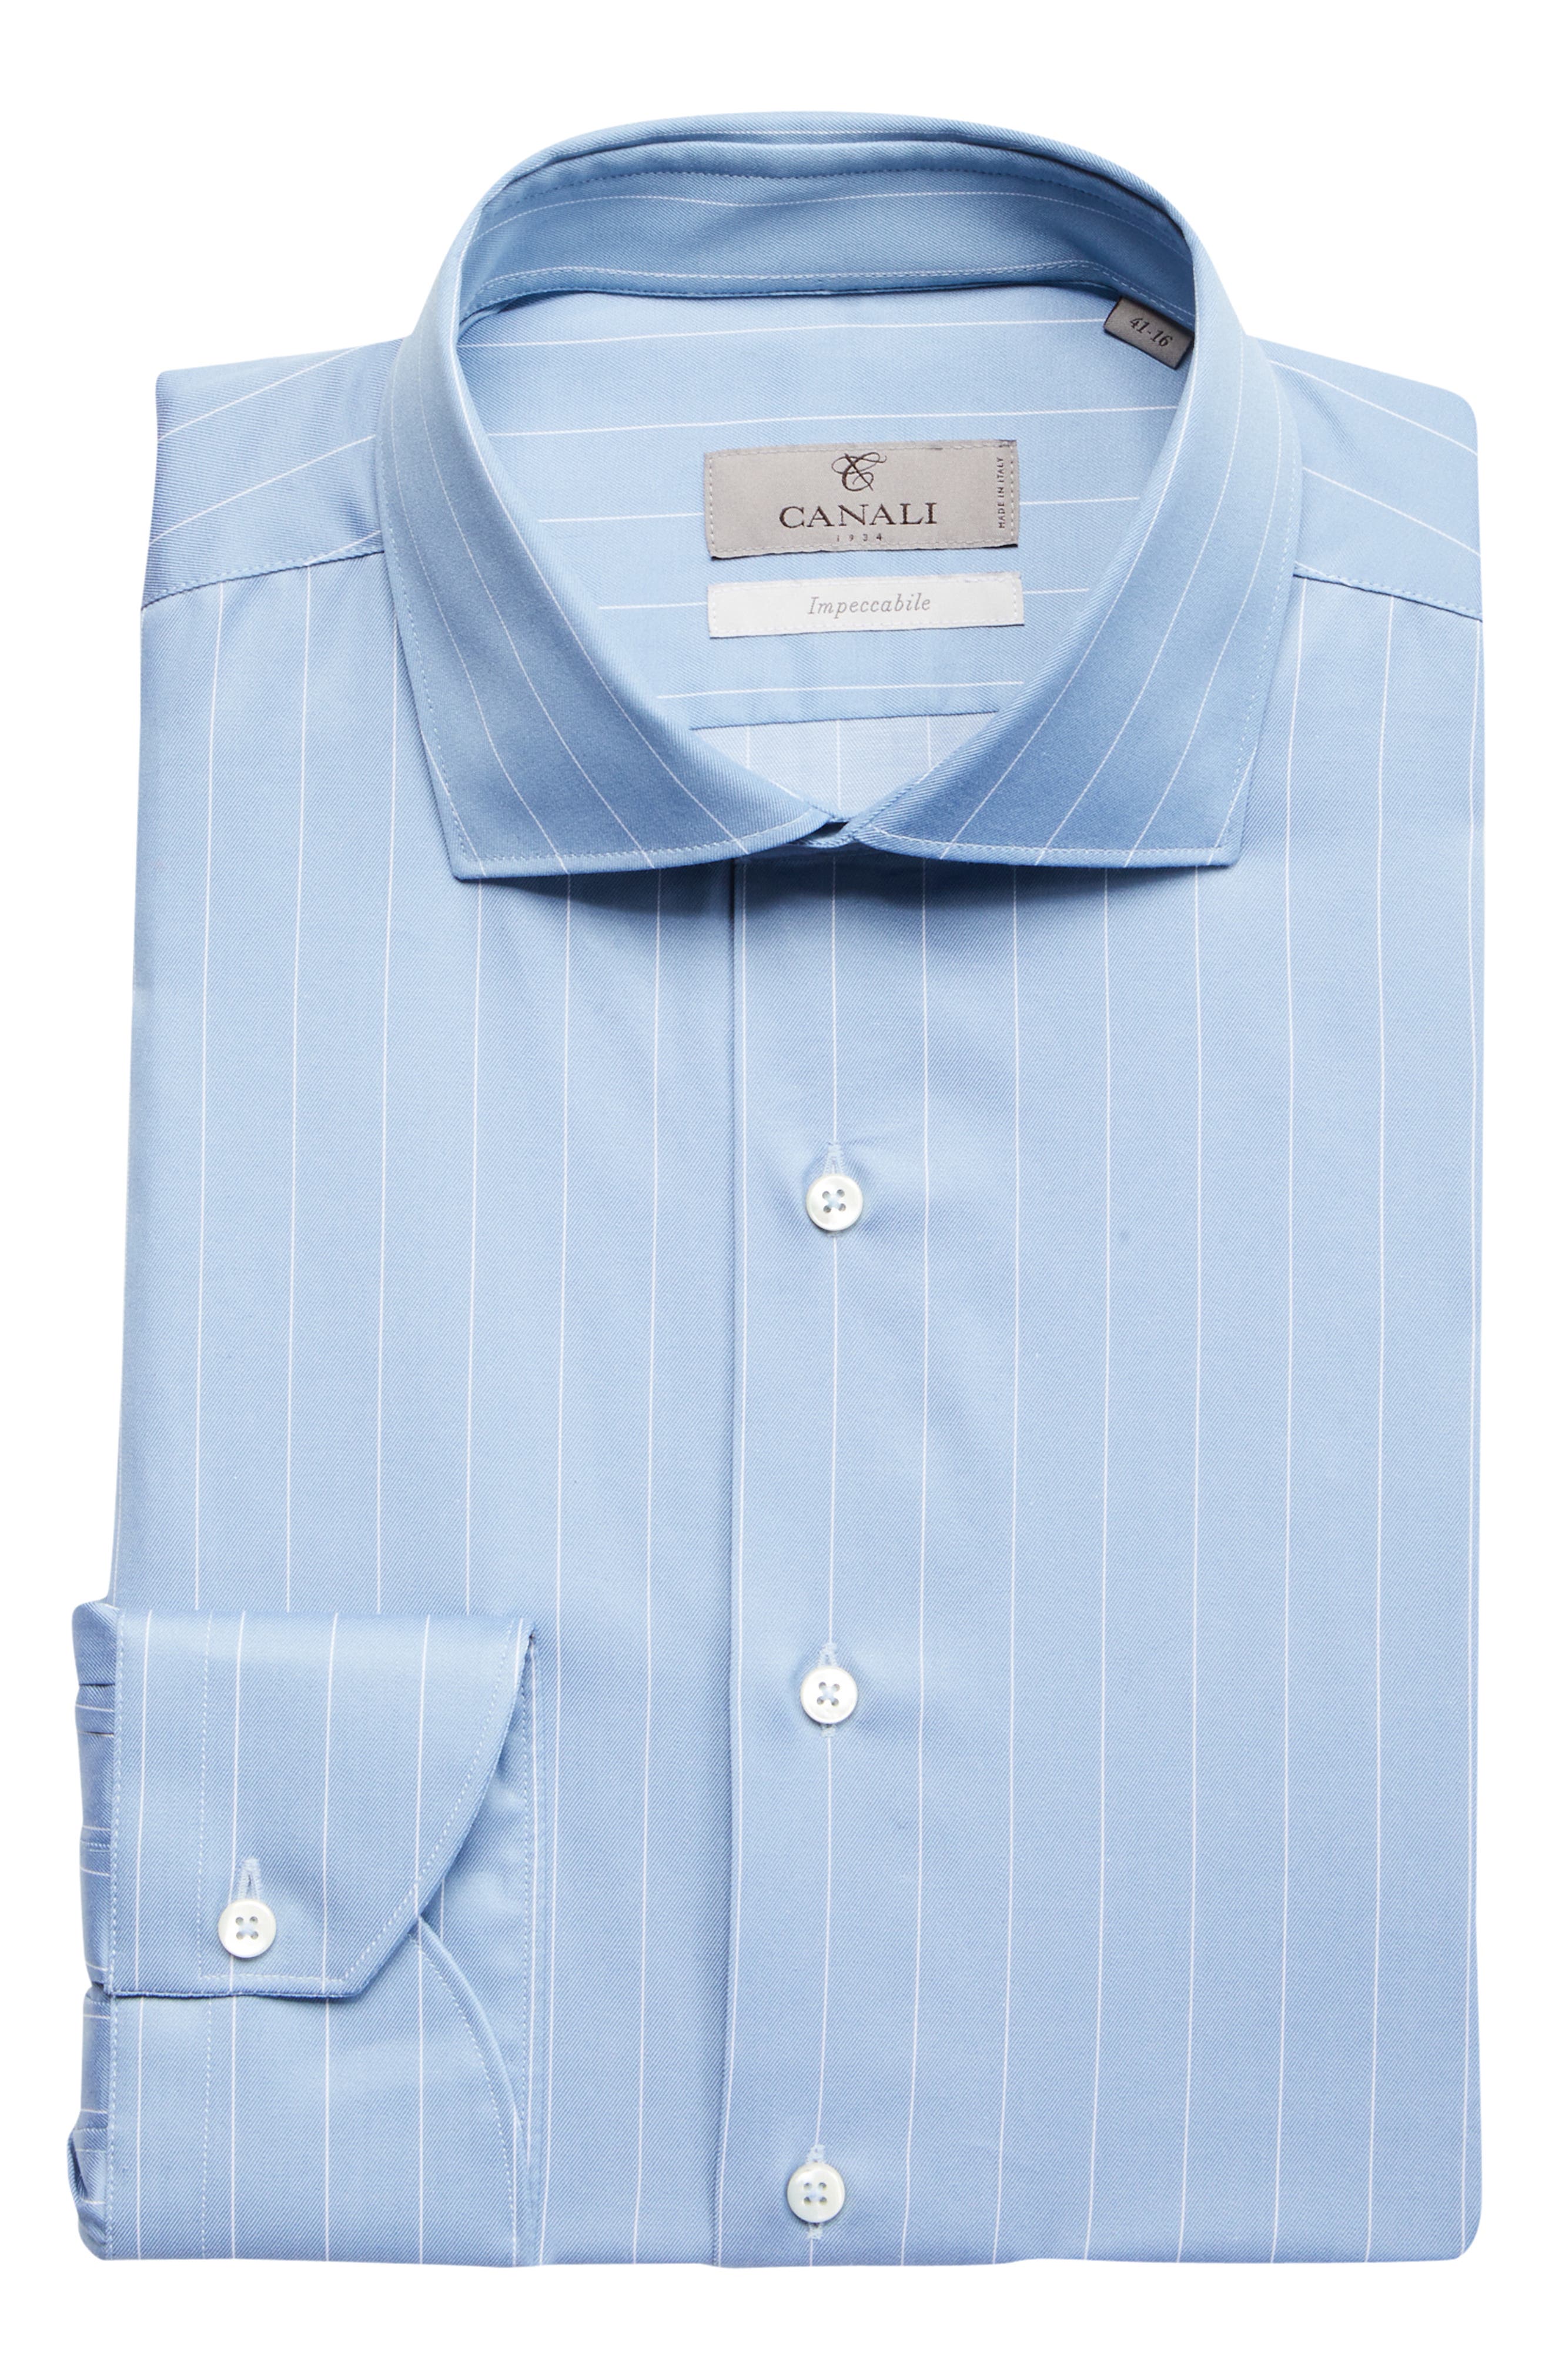 Men's Canali Shirts | Nordstrom